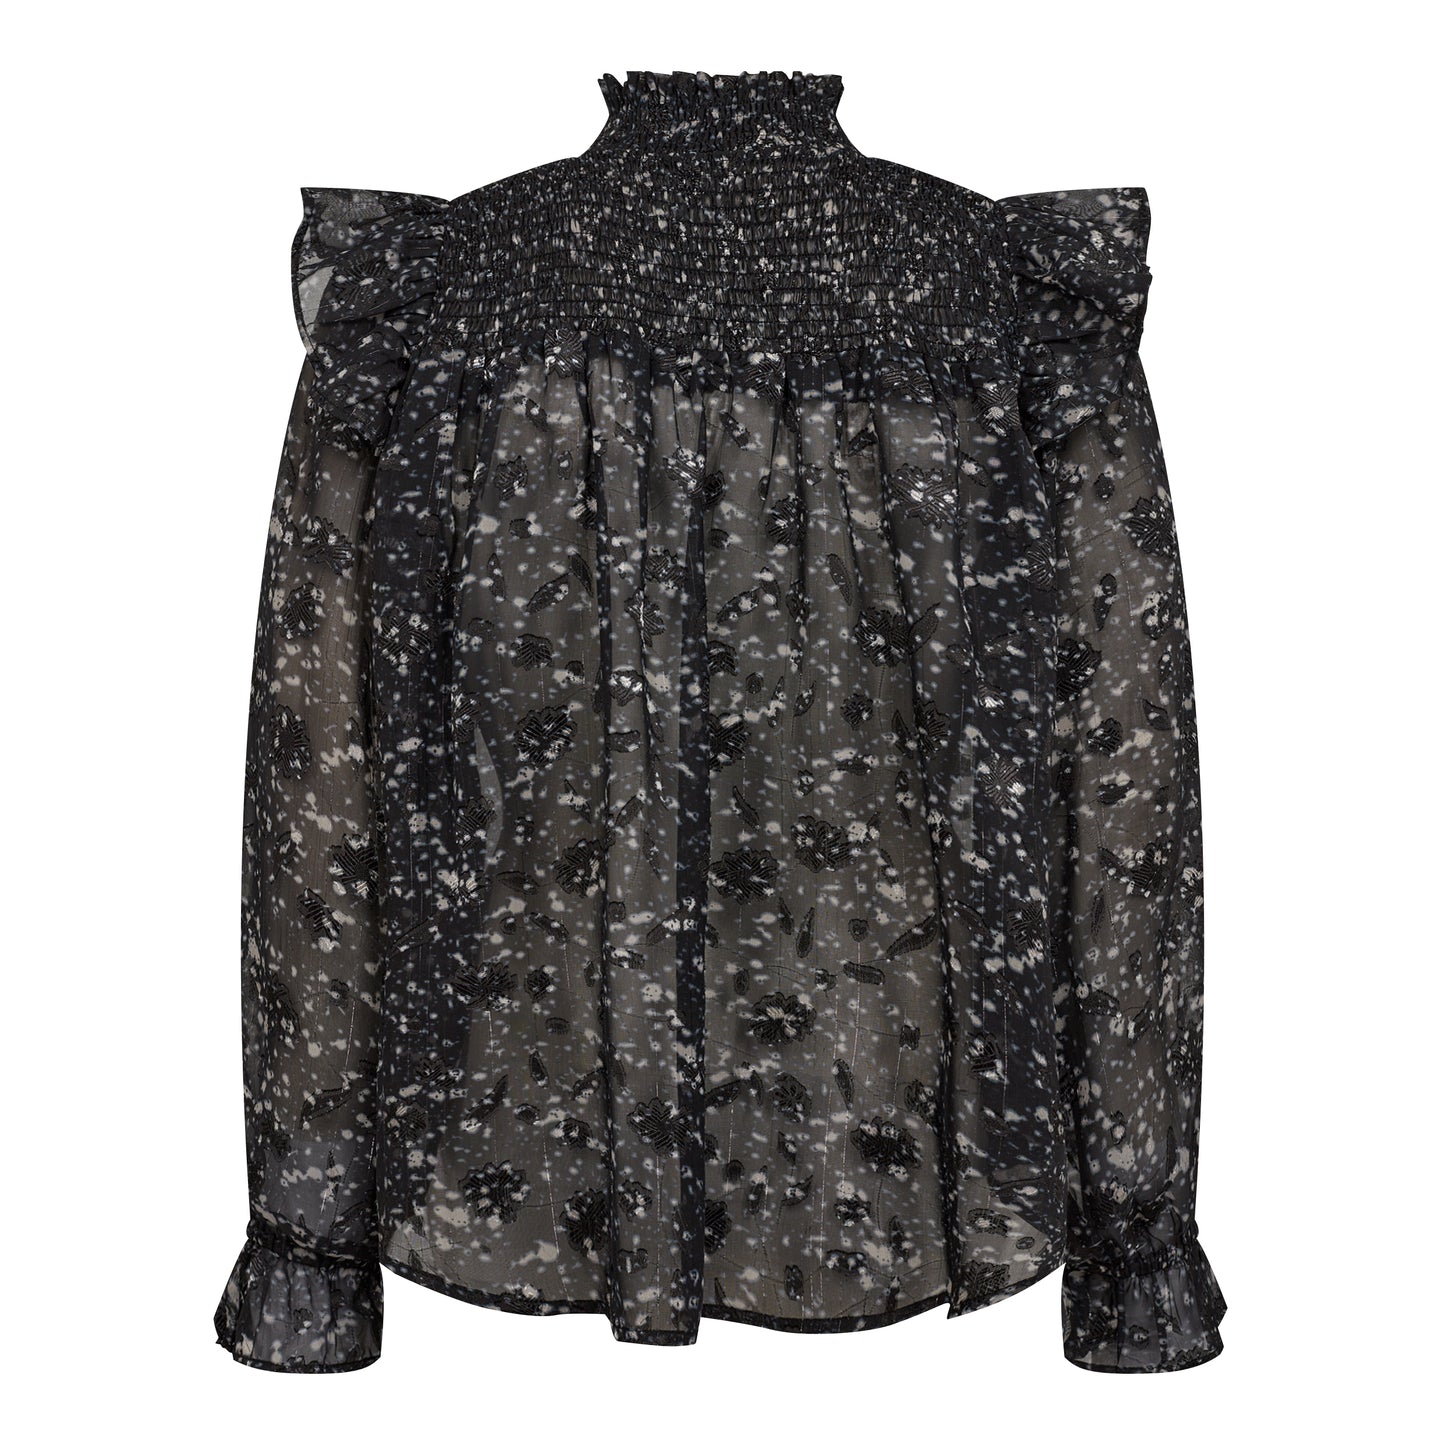 Cocouture - SnowdriftCC Smock Blouse - Black